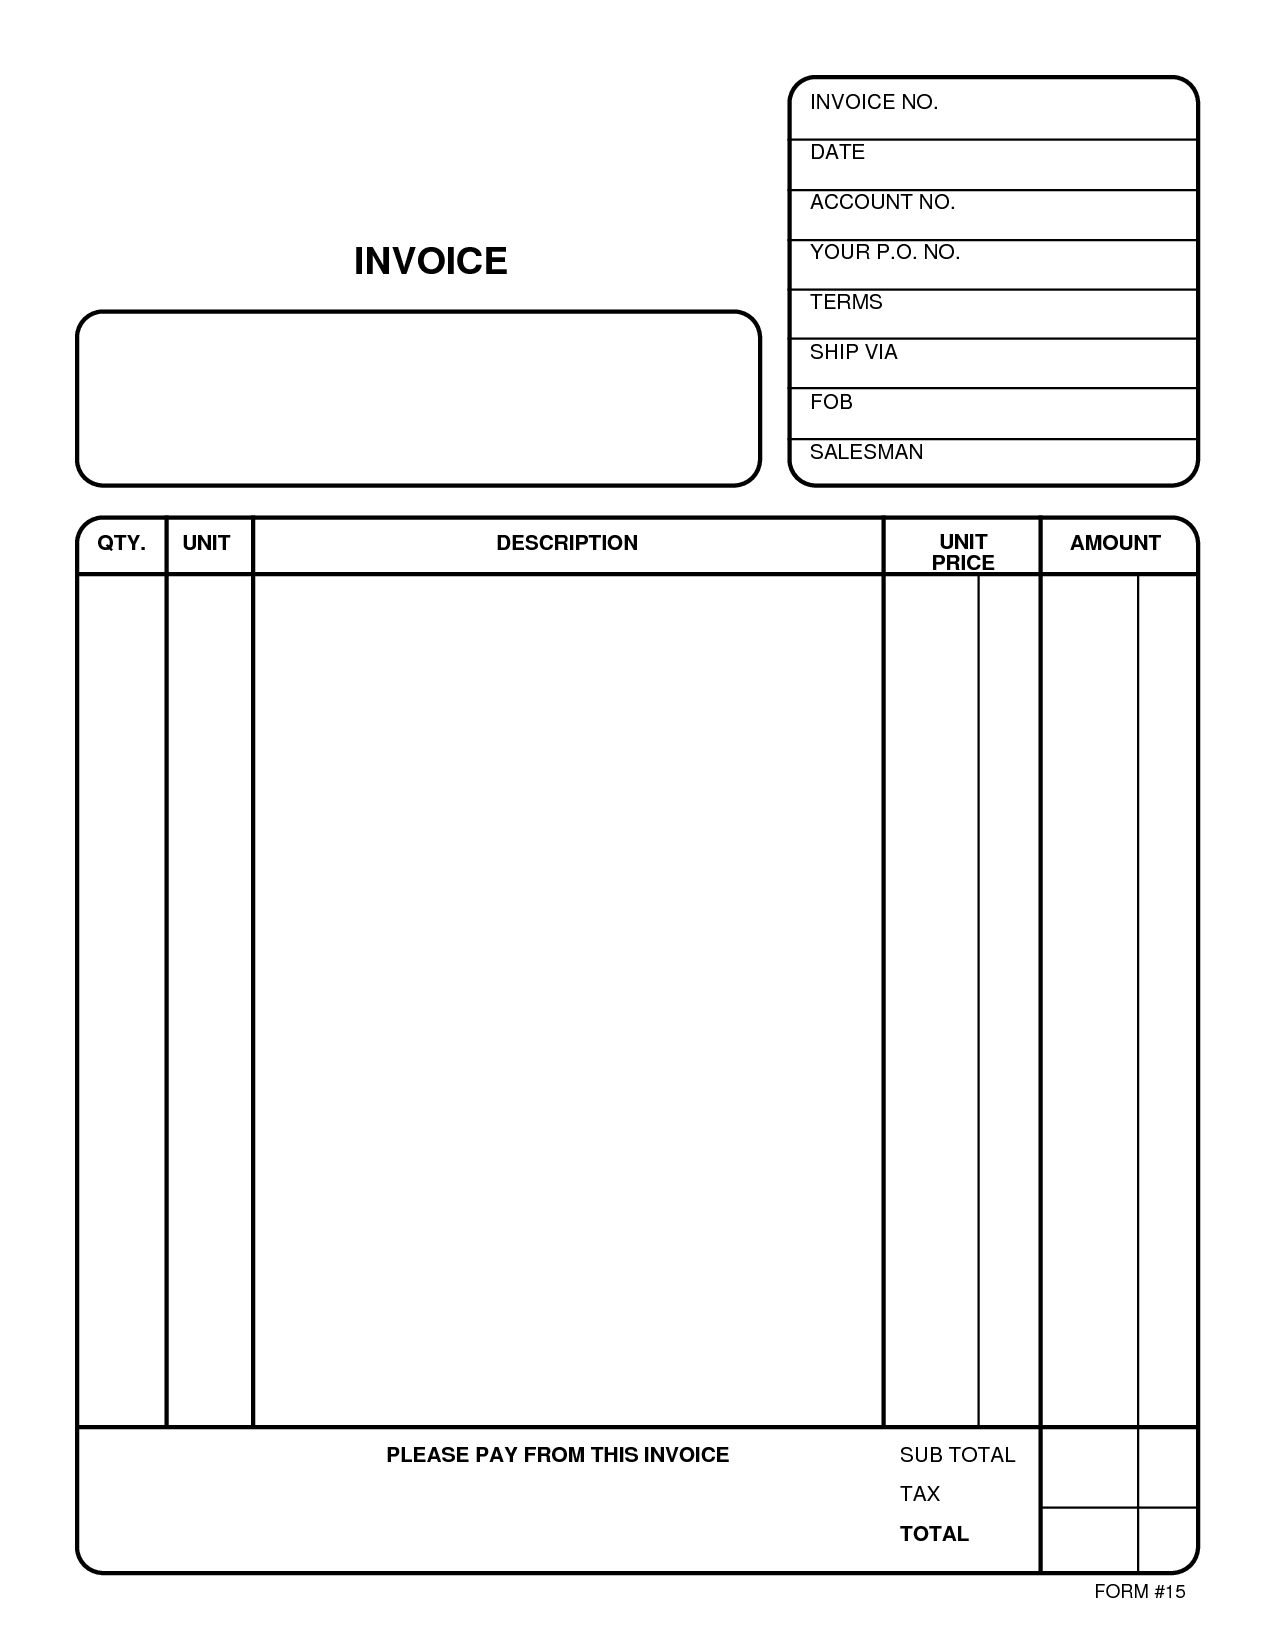 invoice form free delivery receipt template sample business sales invoice form online